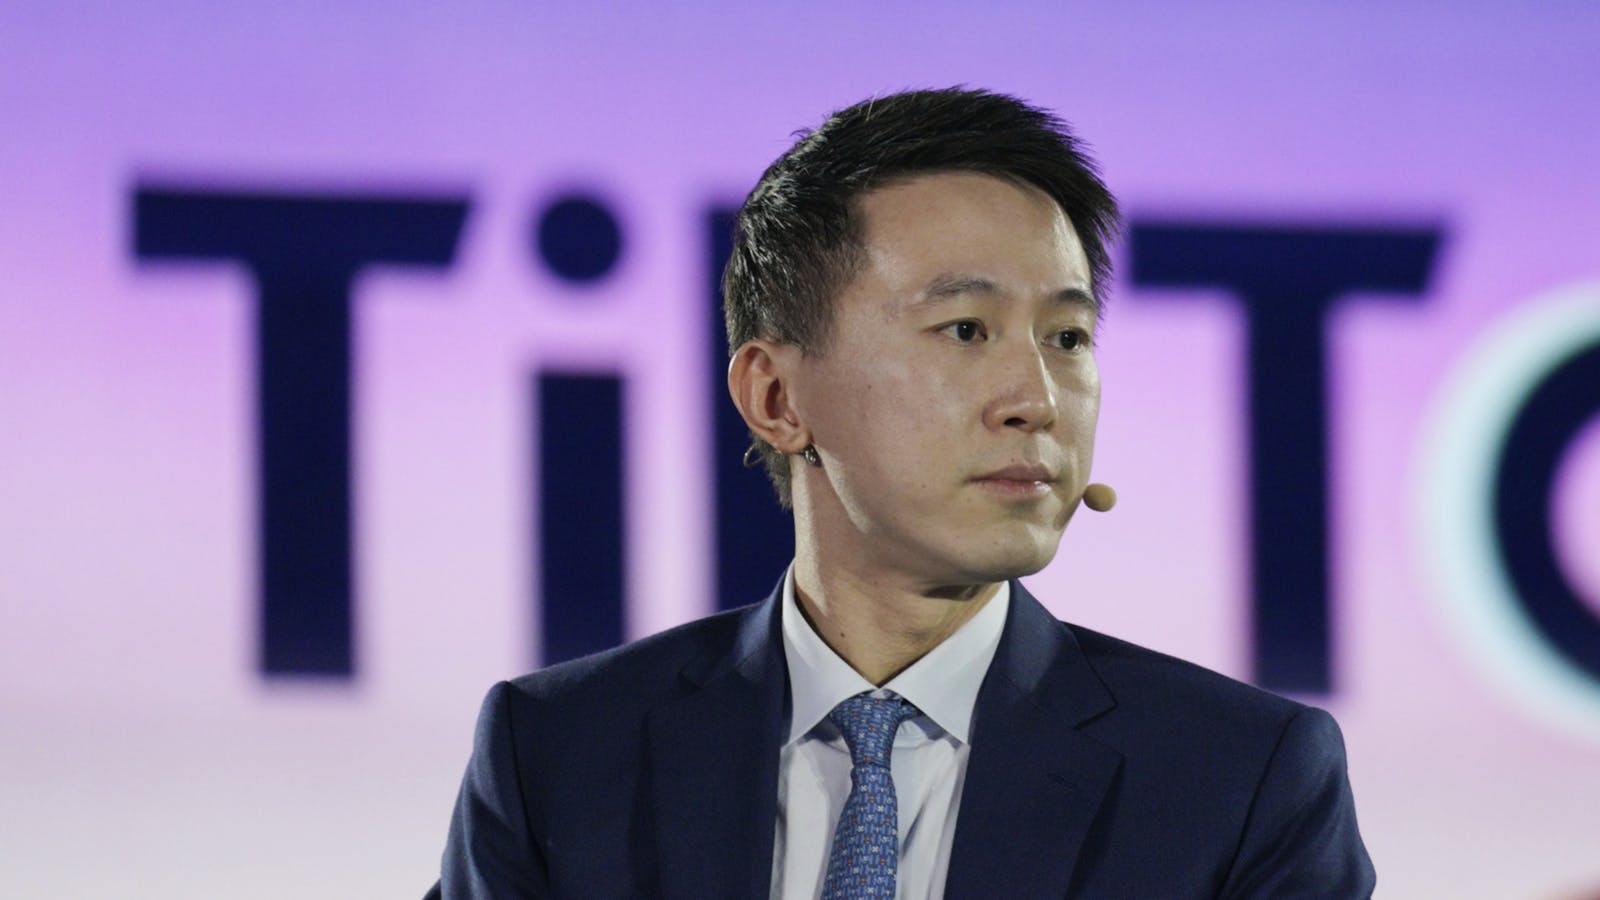 Shou Zi Chew, chief executive officer of TikTok. Photo by Bloomberg.